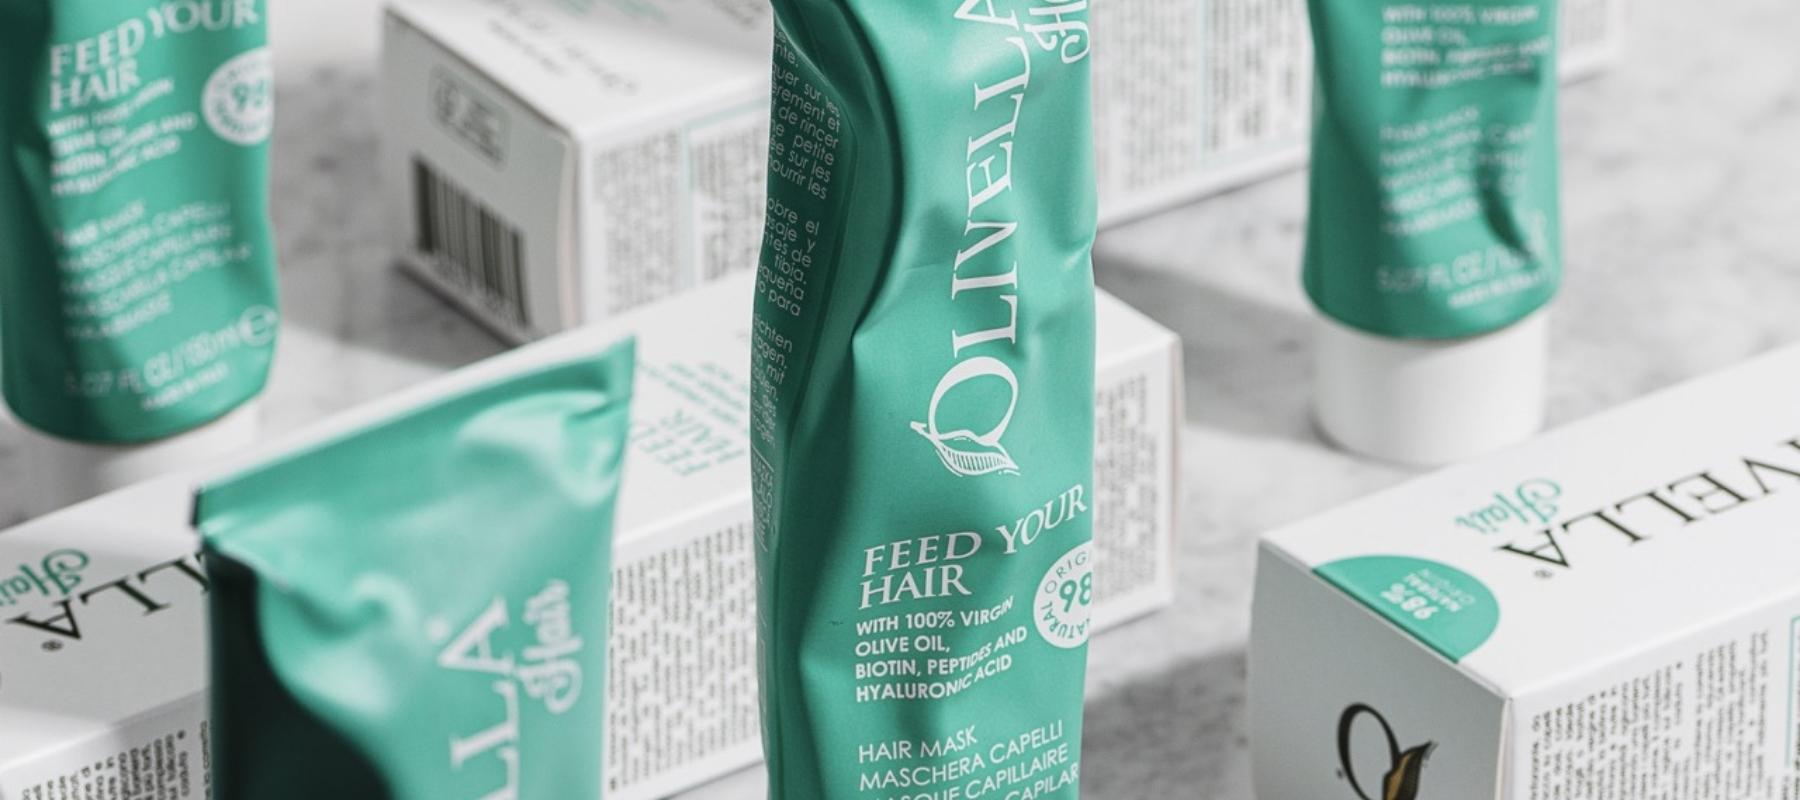 Olive Oil Hair Mask from Olivella